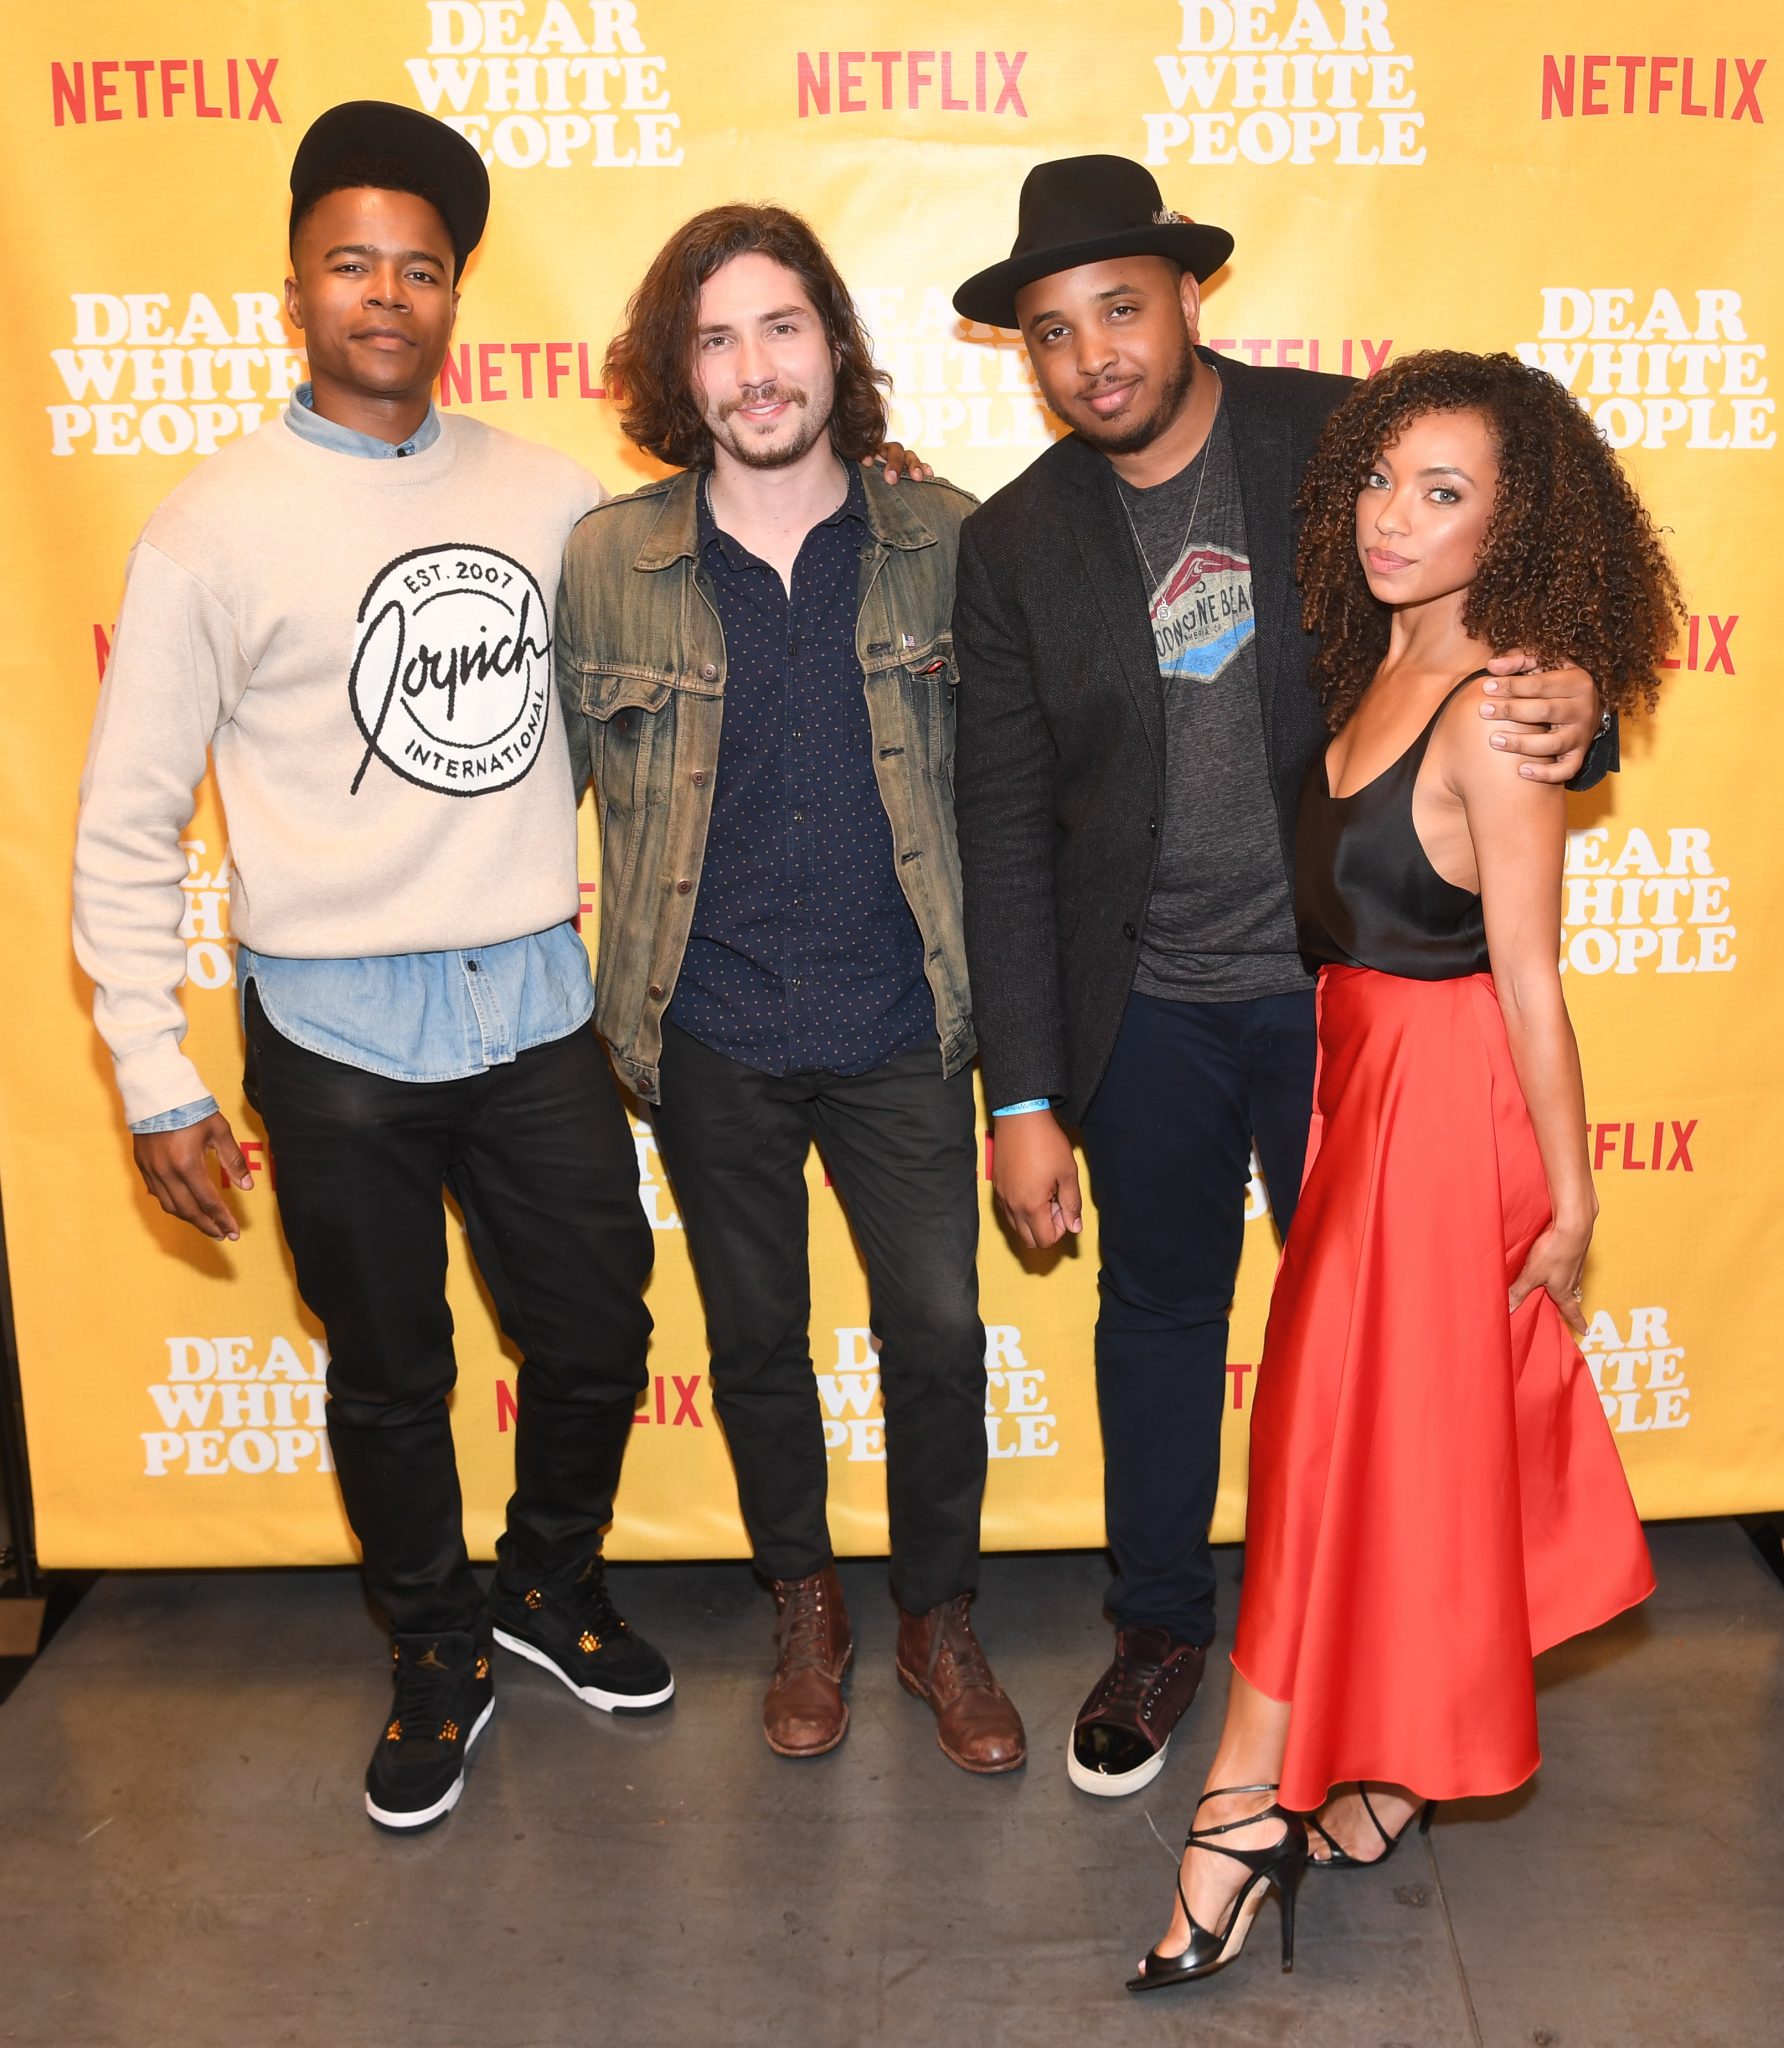 Netflix Dear White People Screening And Cast Q&A In Atlanta